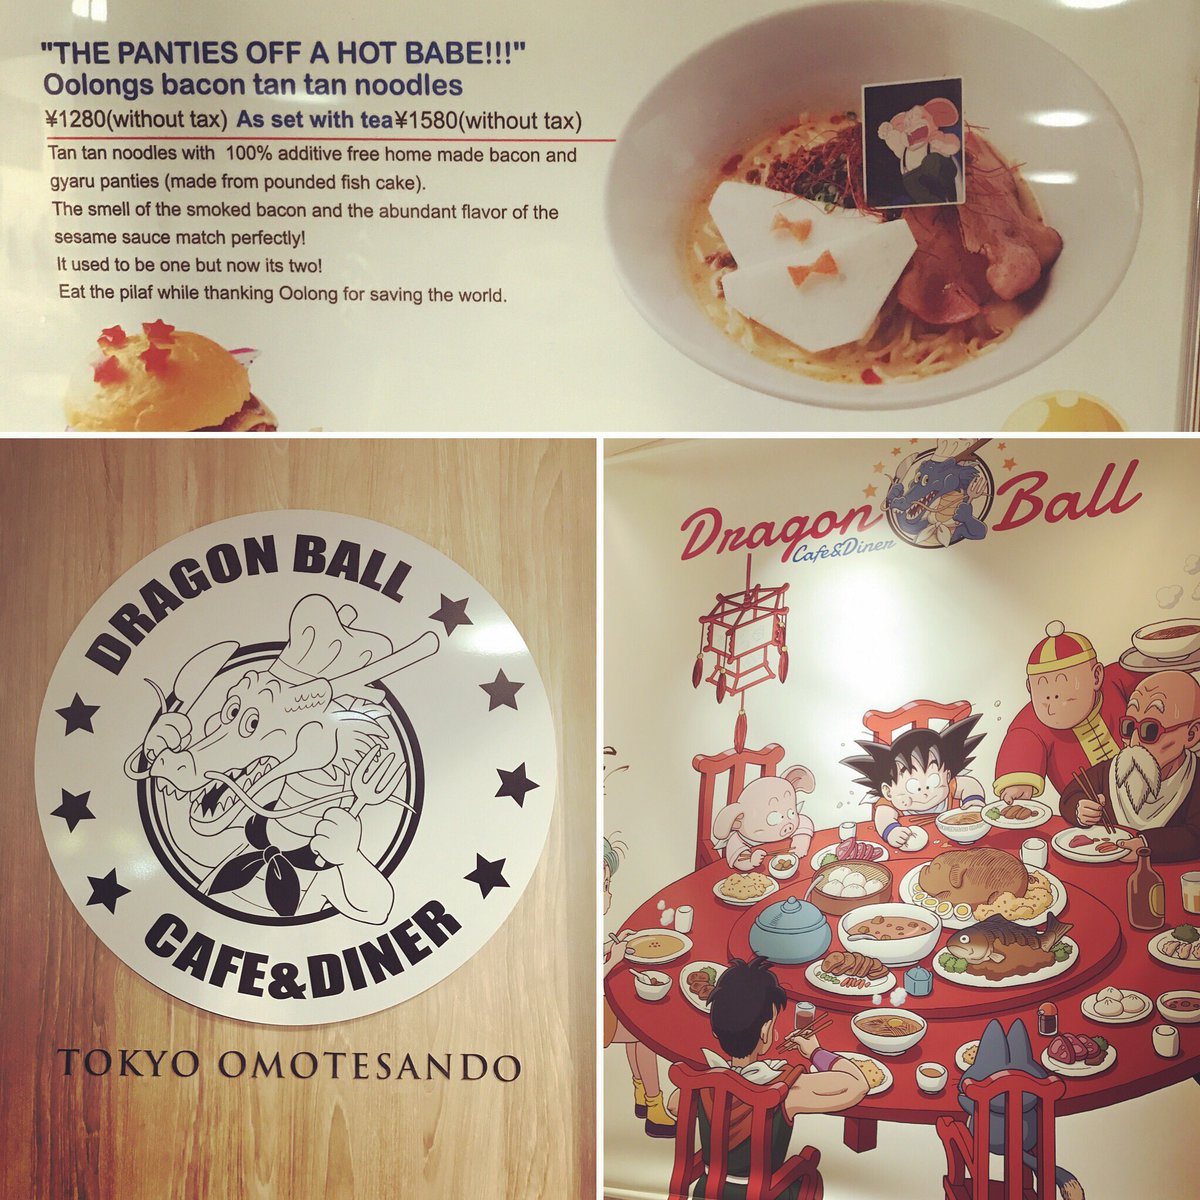 Let's take a moment to appreciate Oolong's 'the panties off a hot babe' dish #dragonball 